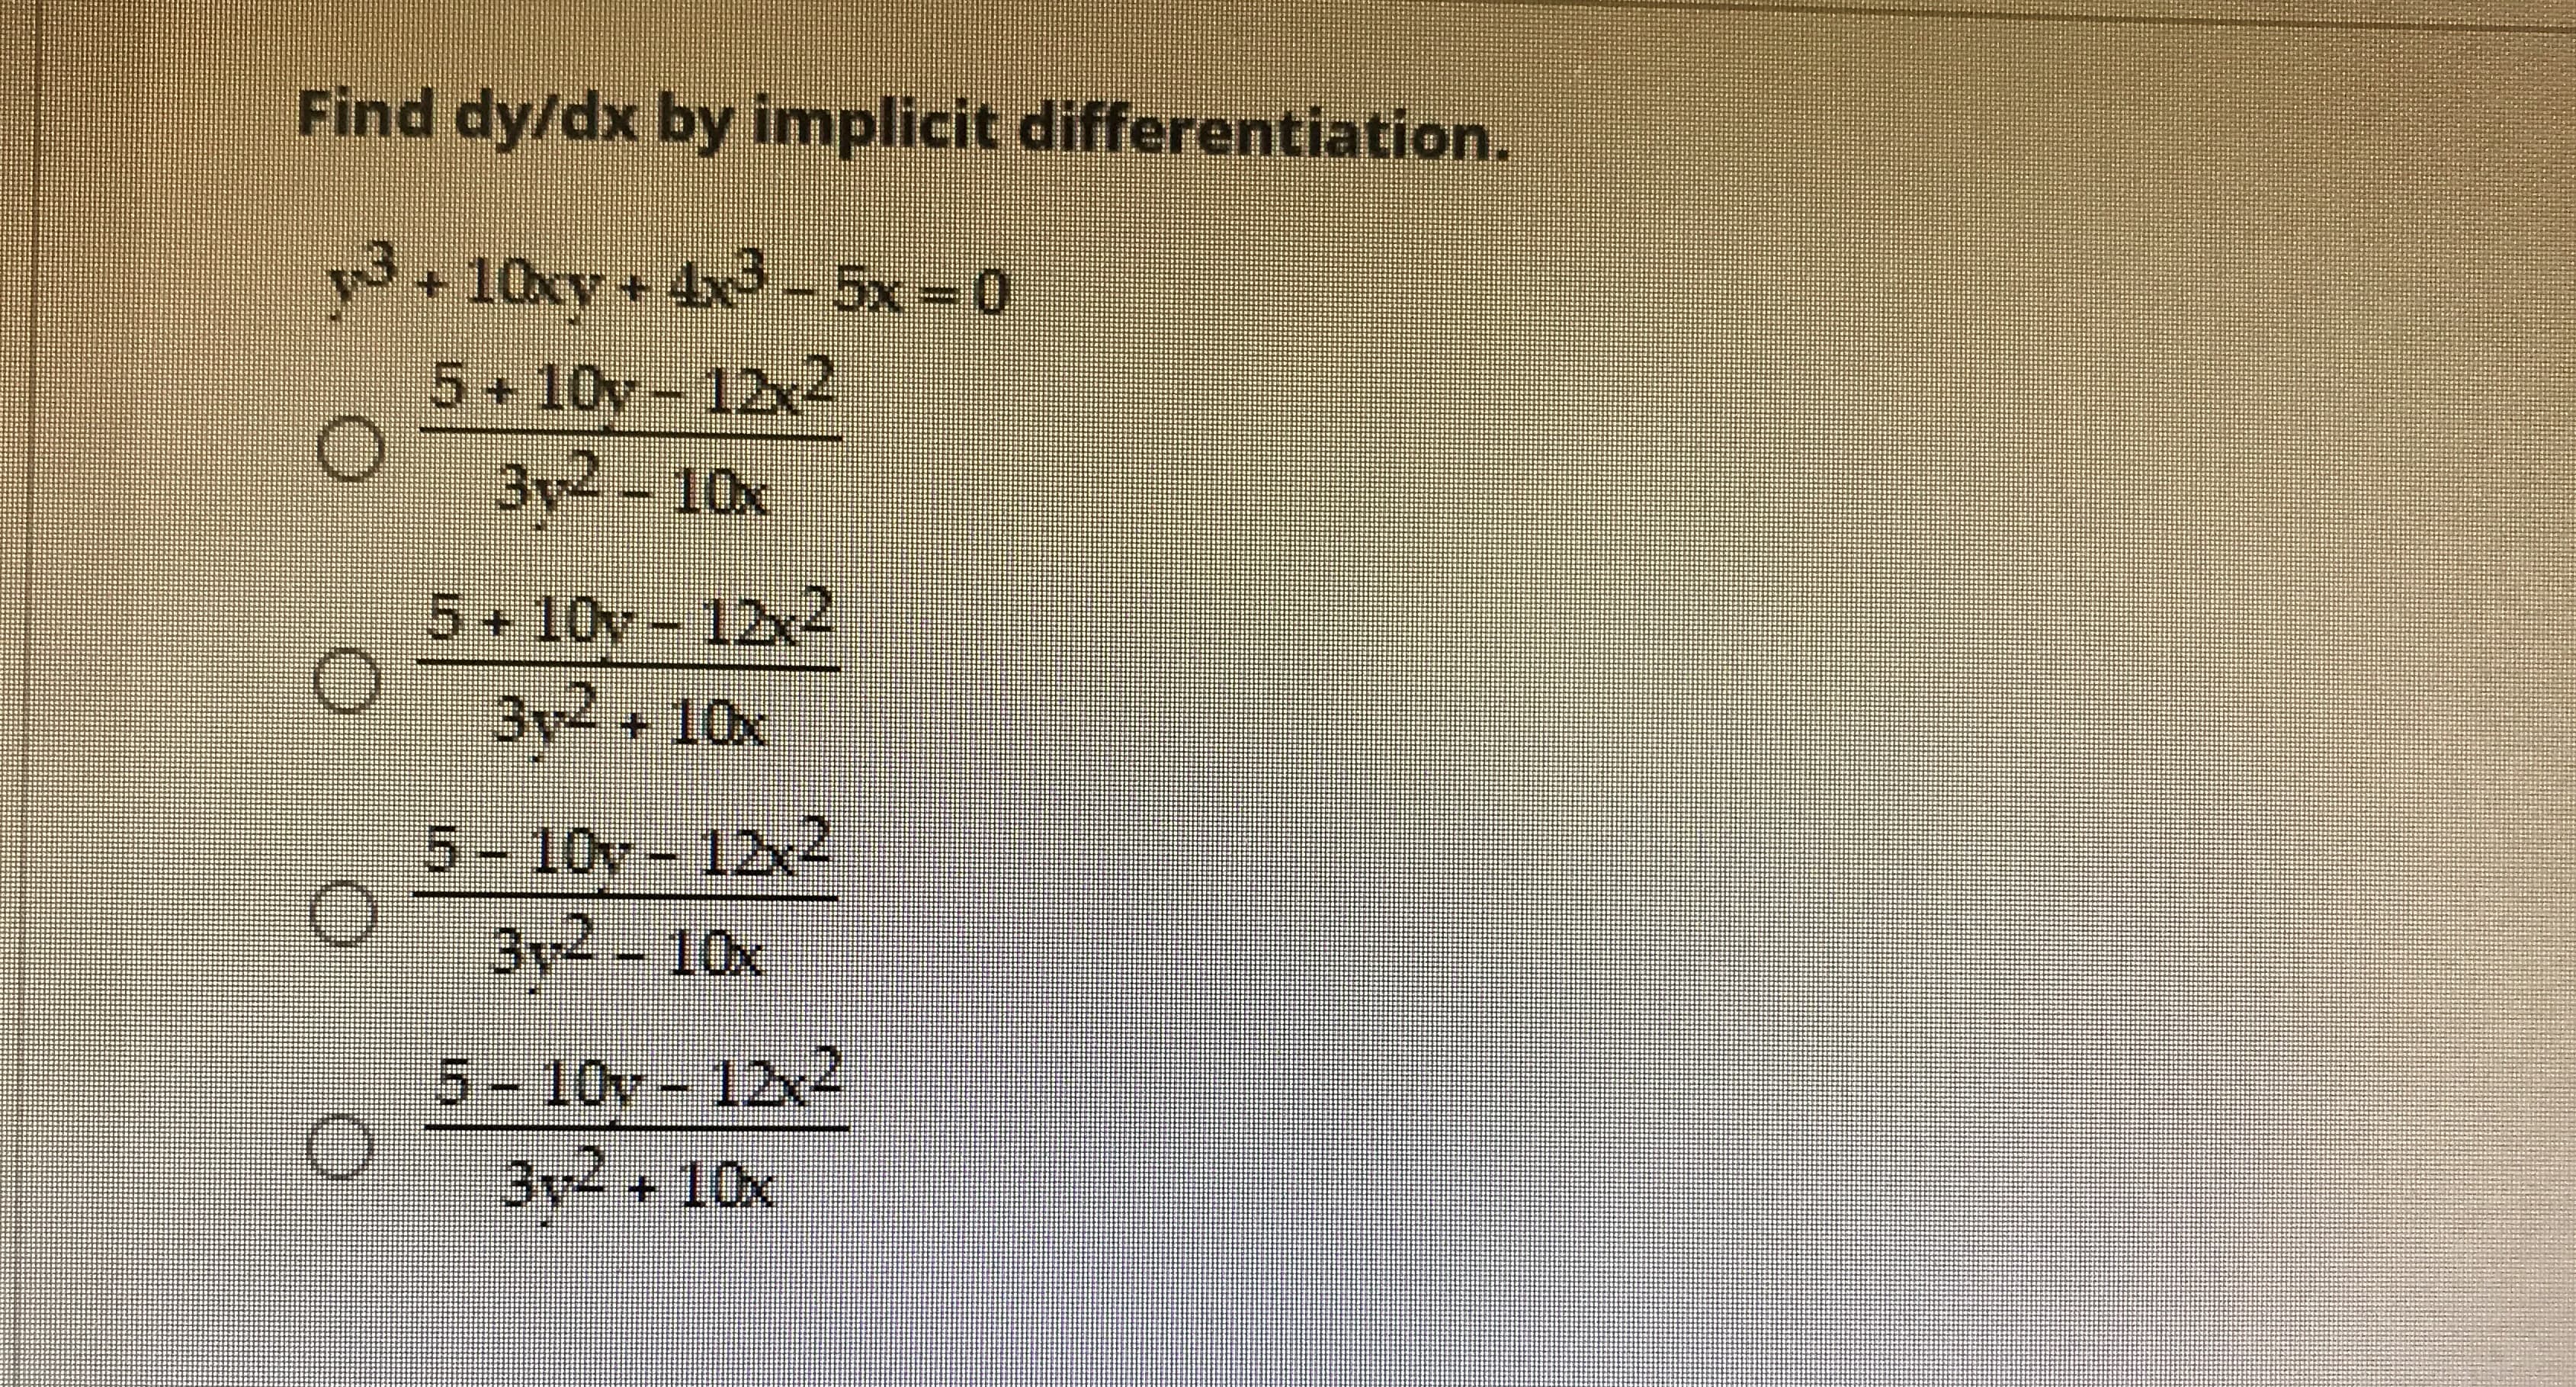 Find dy/dx by implicit differentiation.
3+10xv+4x-5x=0
